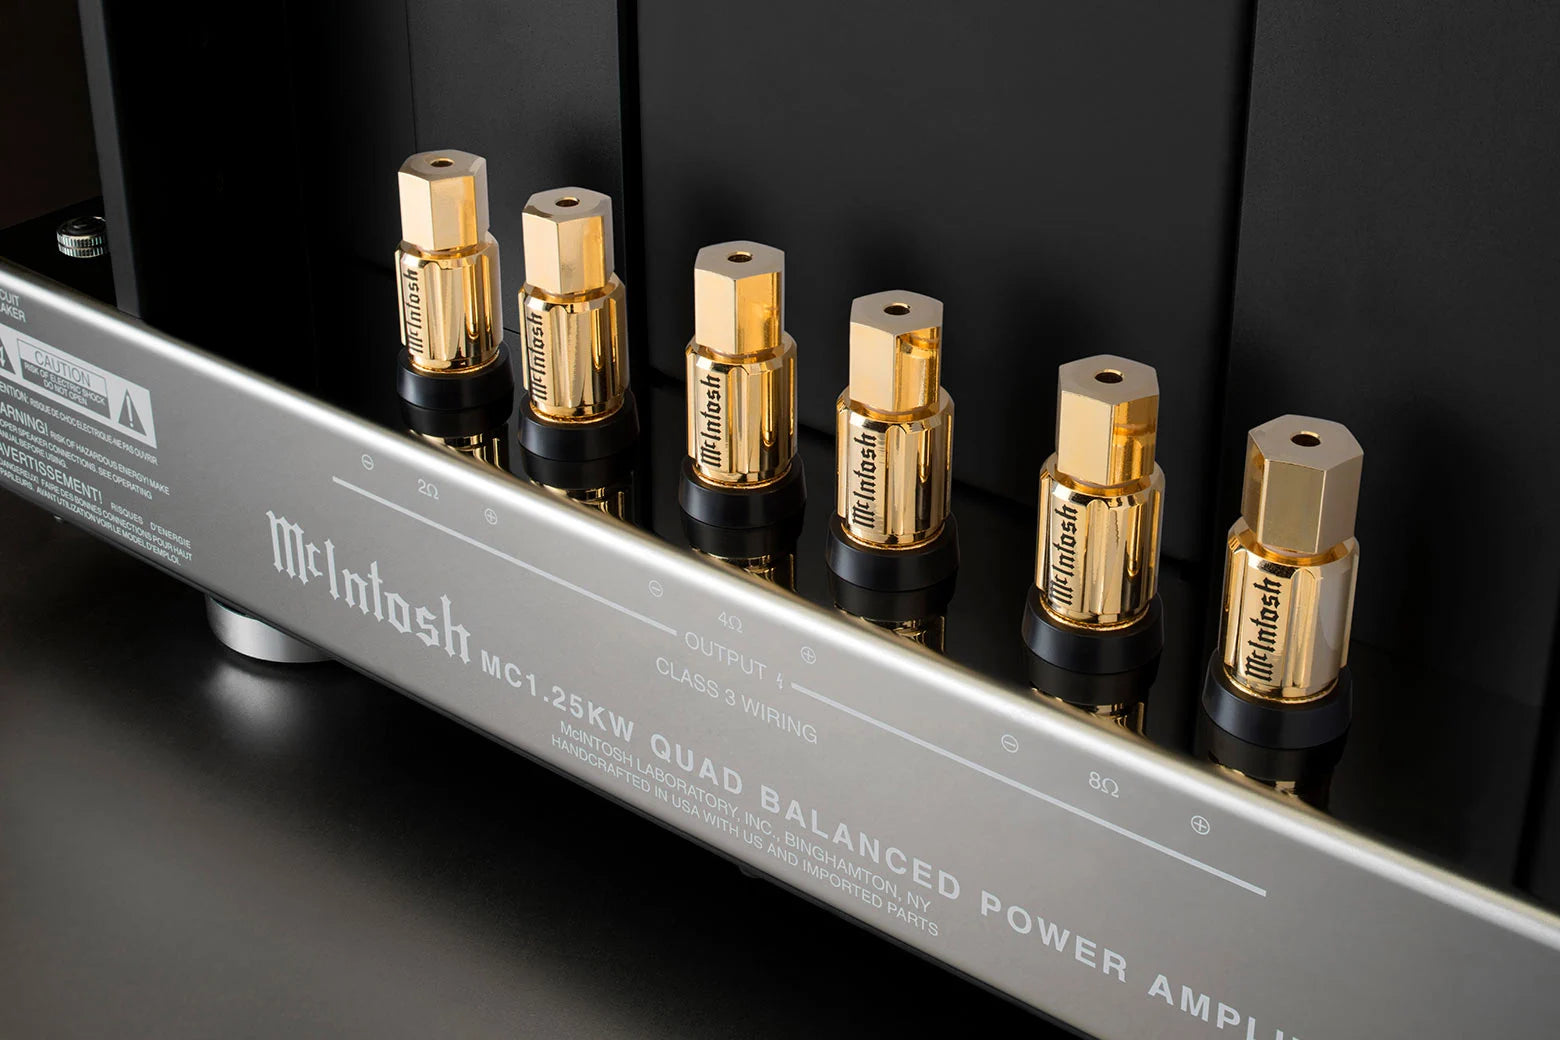 McIntosh MC1.25KW - 75th Anniversary Edition (In-Store Purchases Only)